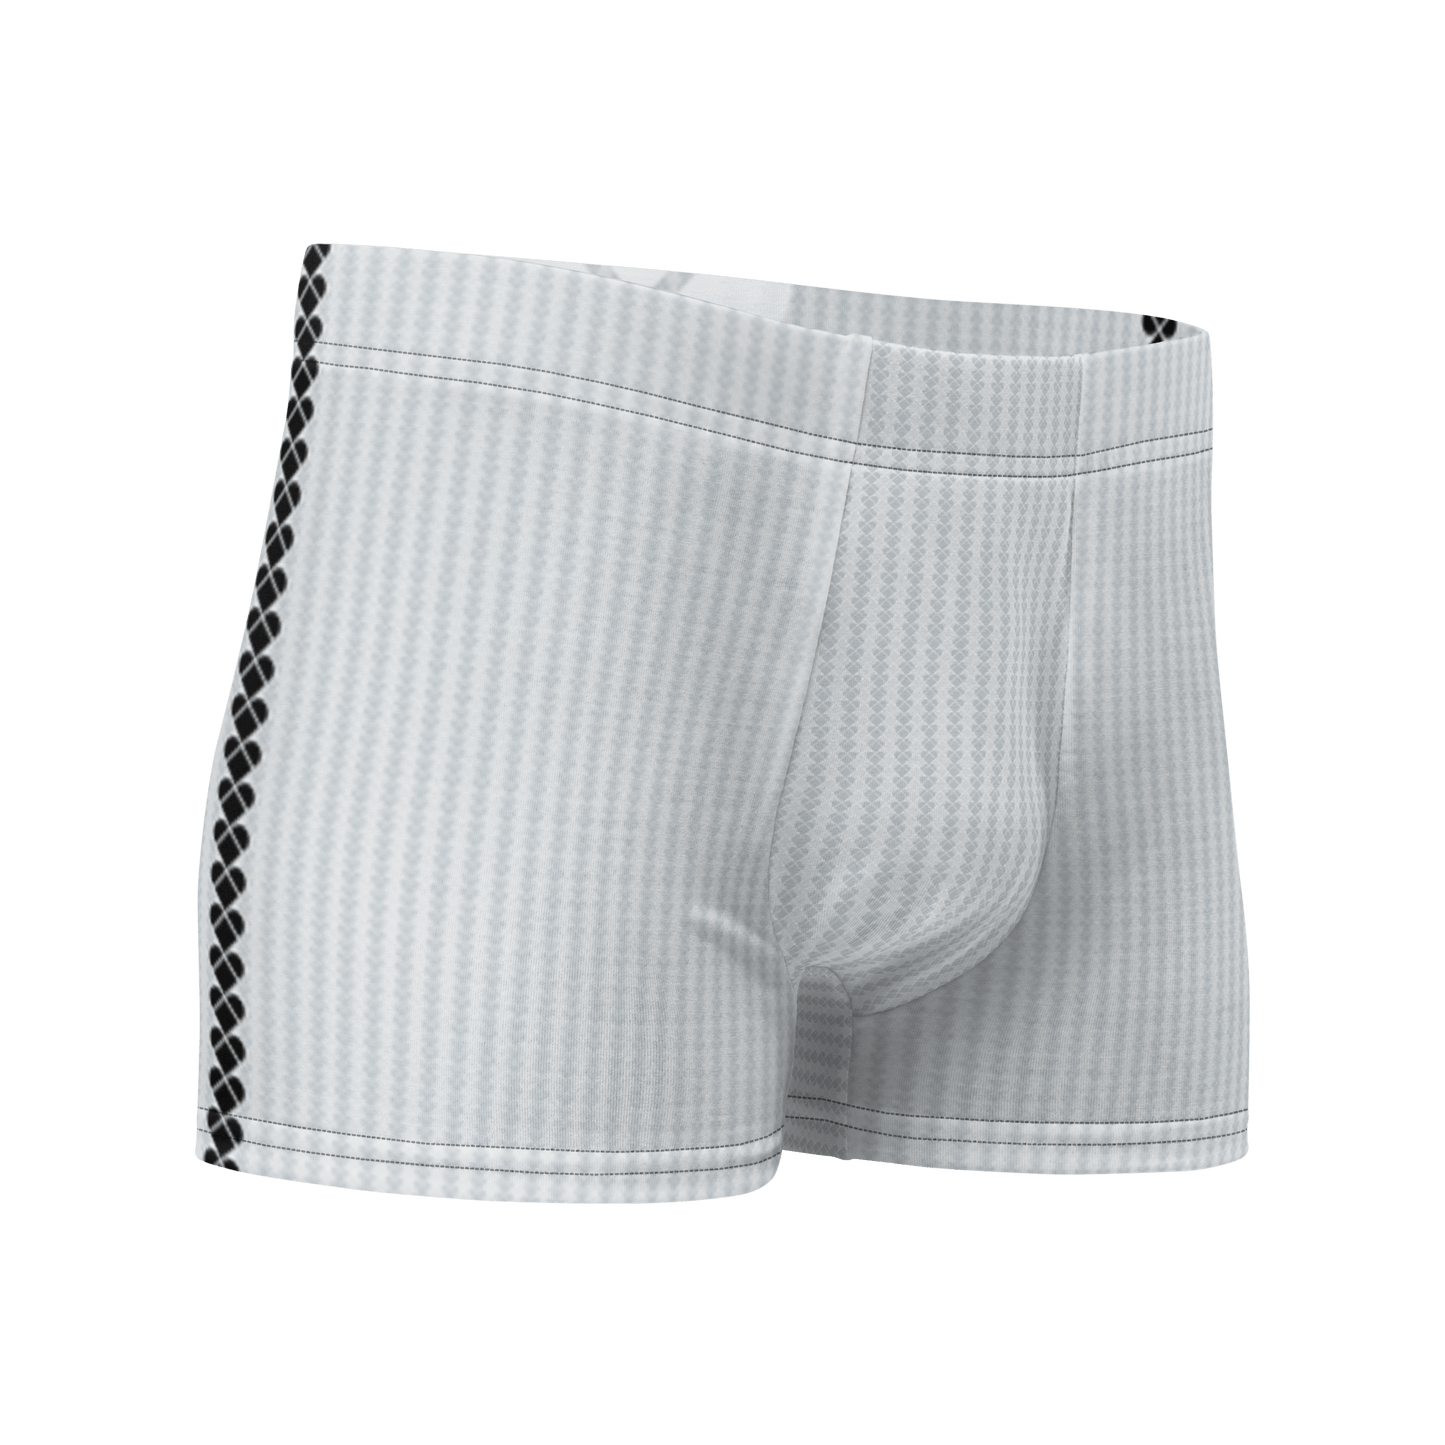 Boxers - Light gray boxers with a whimsical 'lovogram' pattern